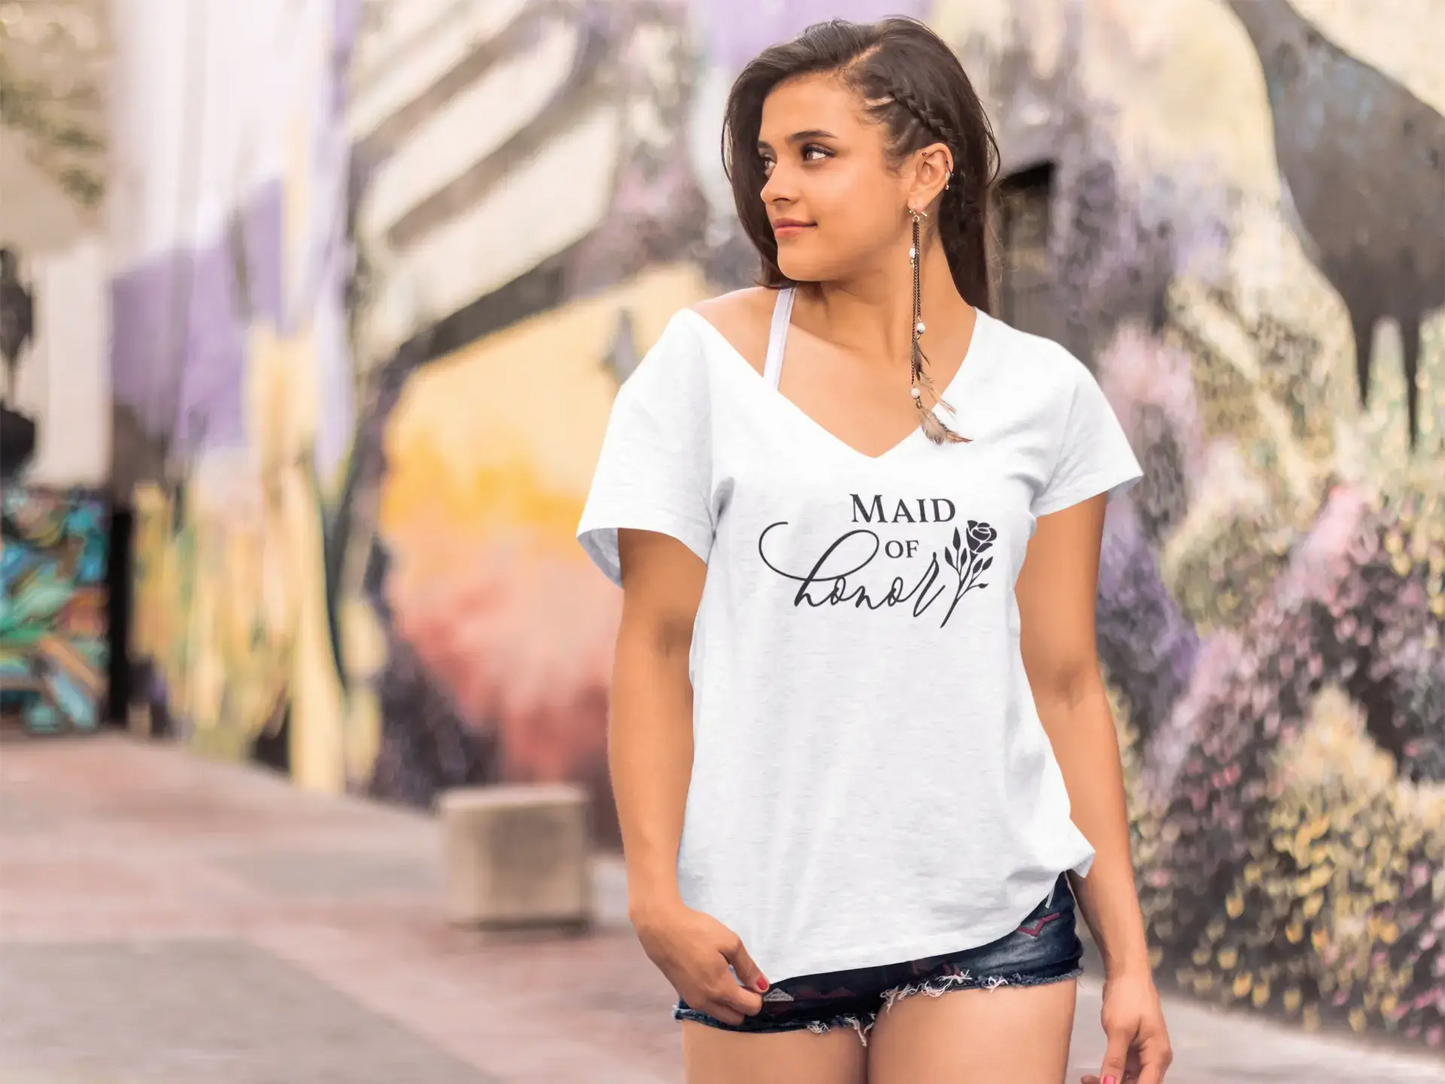 ULTRABASIC T-Shirt Femme Maid Of Honor - T-Shirt à Manches Courtes Tops